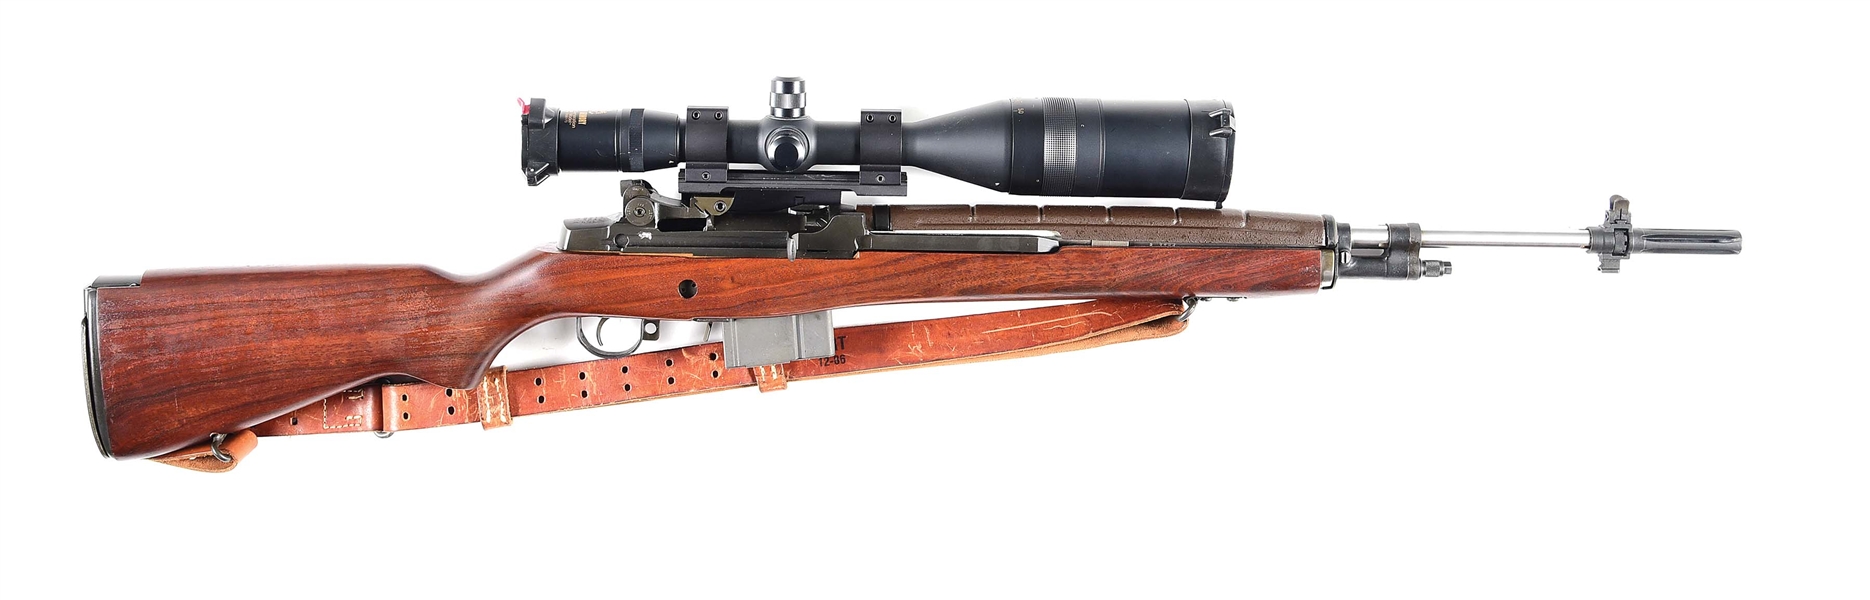 (M) PRE-BAN NATIONAL MATCH SPRINGFIELD M1A SEMI AUTOMATIC RIFLE WITH KRIEGER BARREL, SCOPE AND CASE.